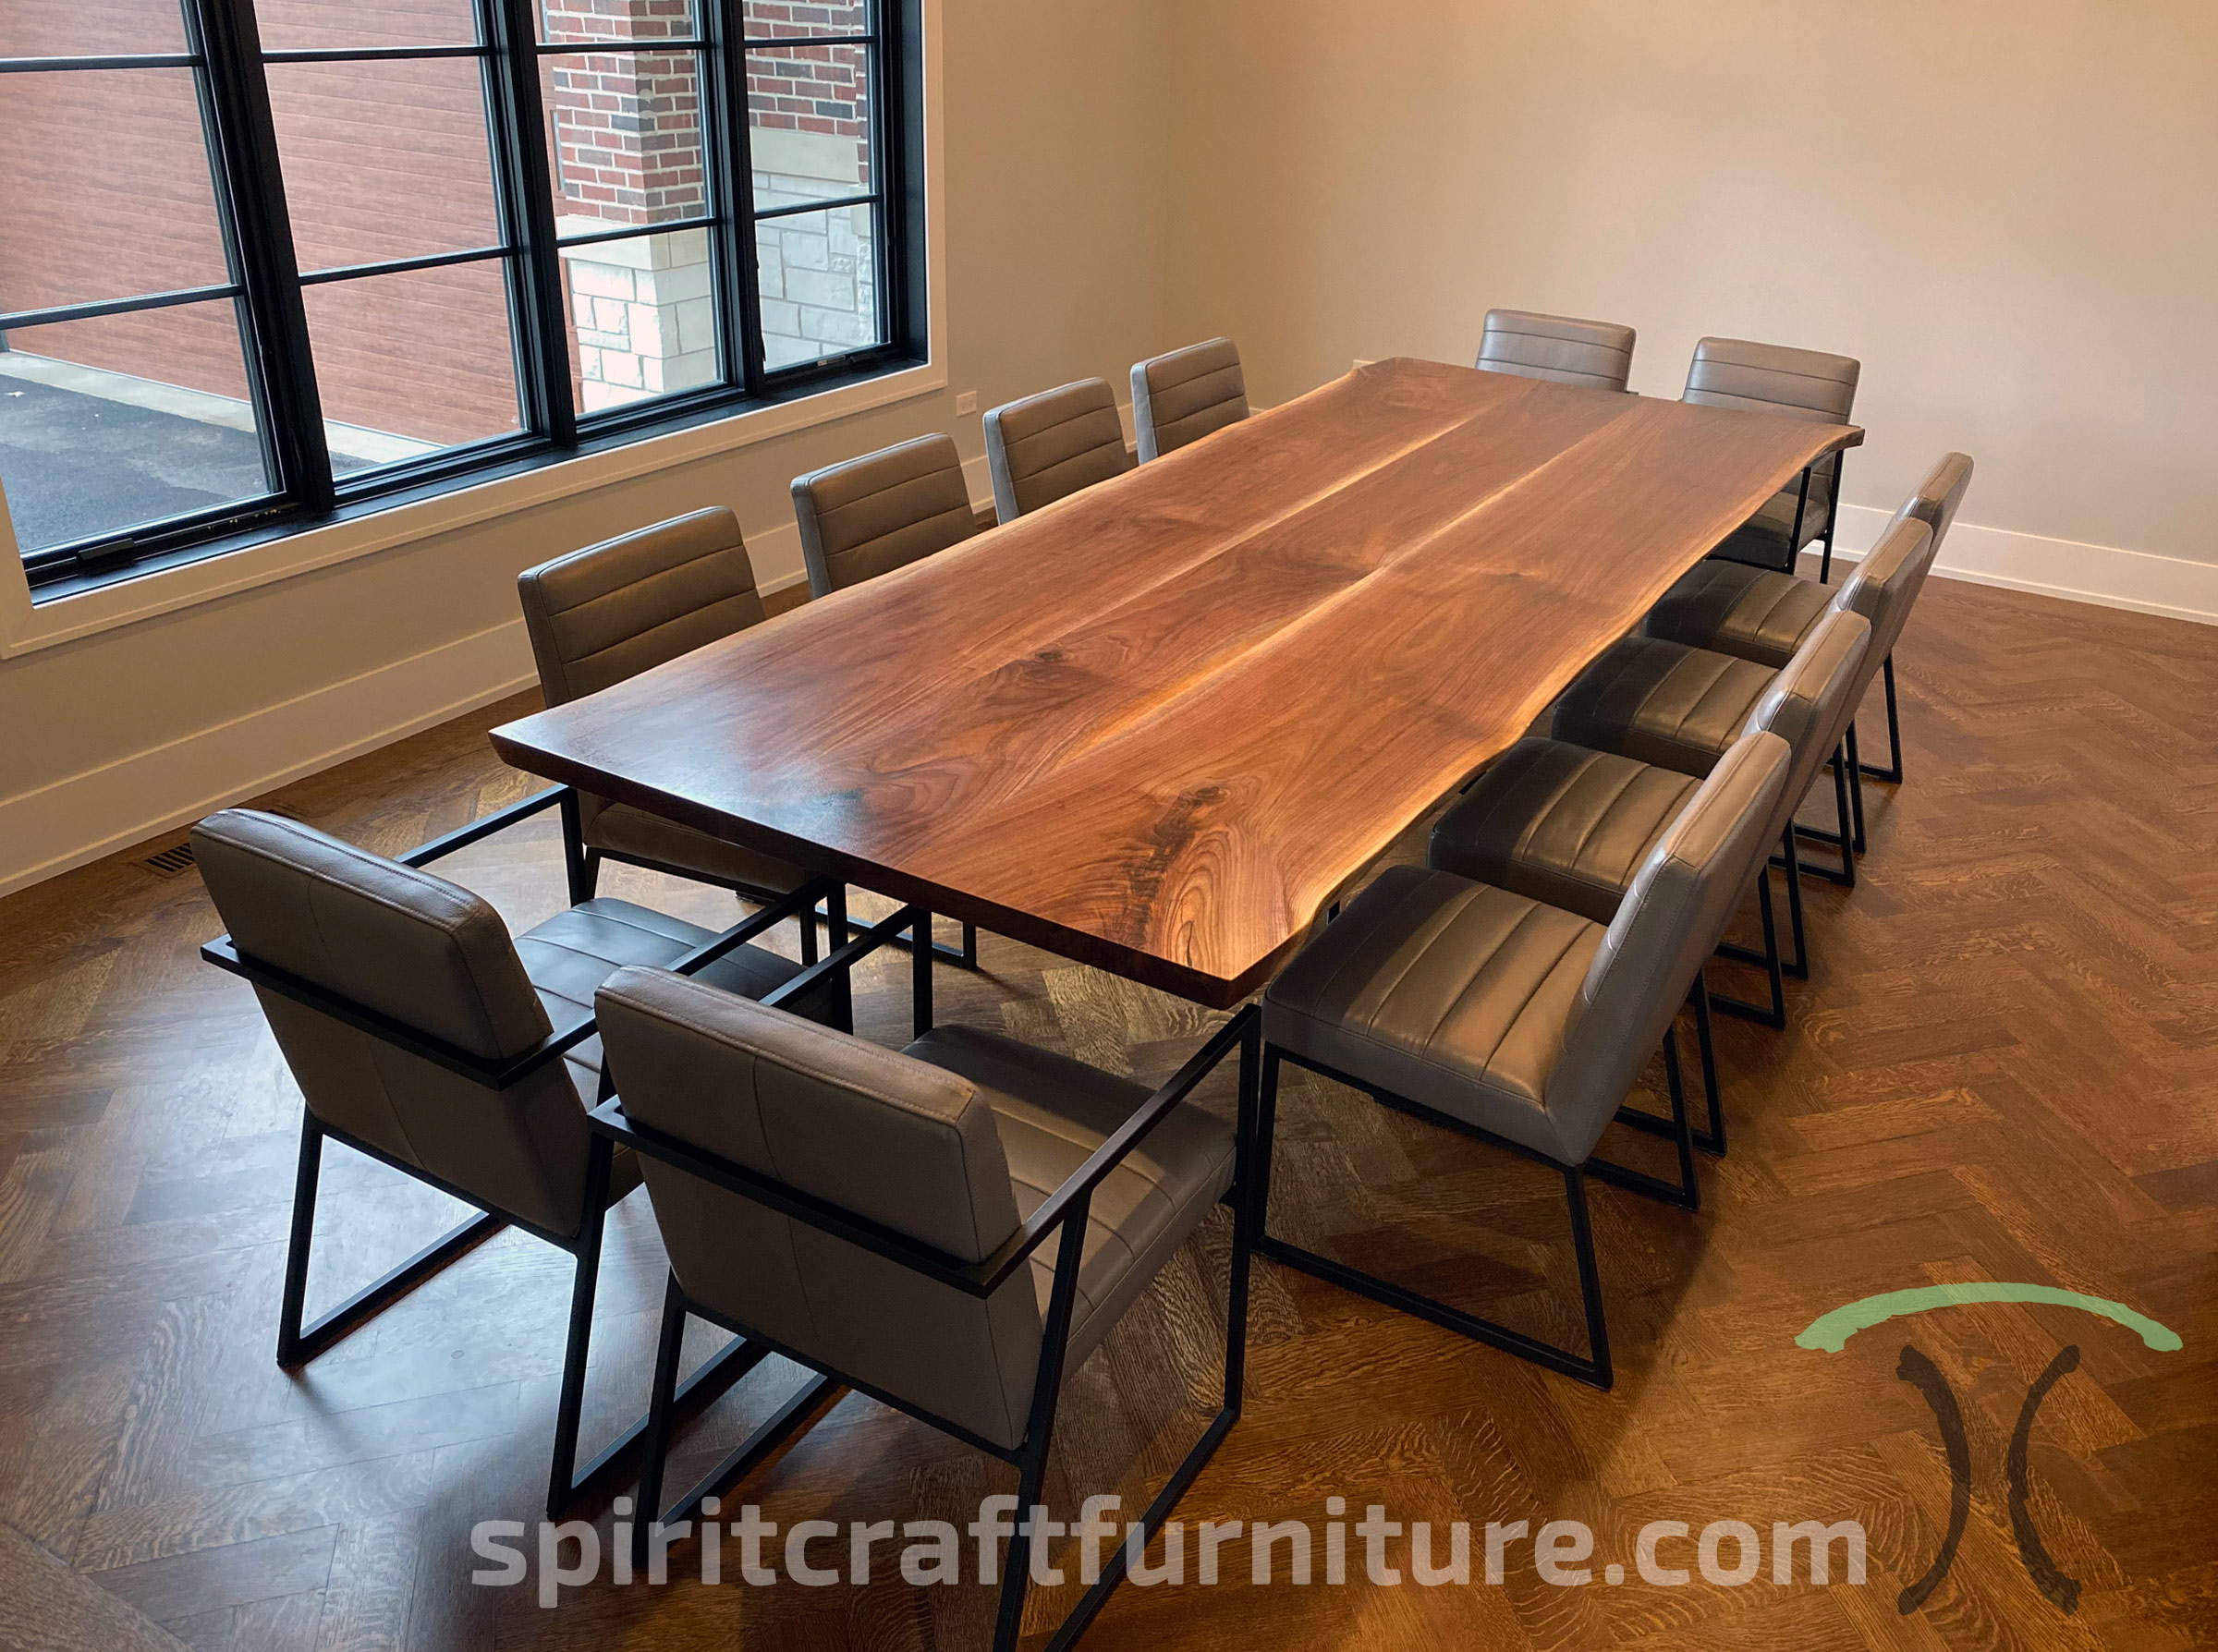 Live edge dining tables, custom fabricated table tops